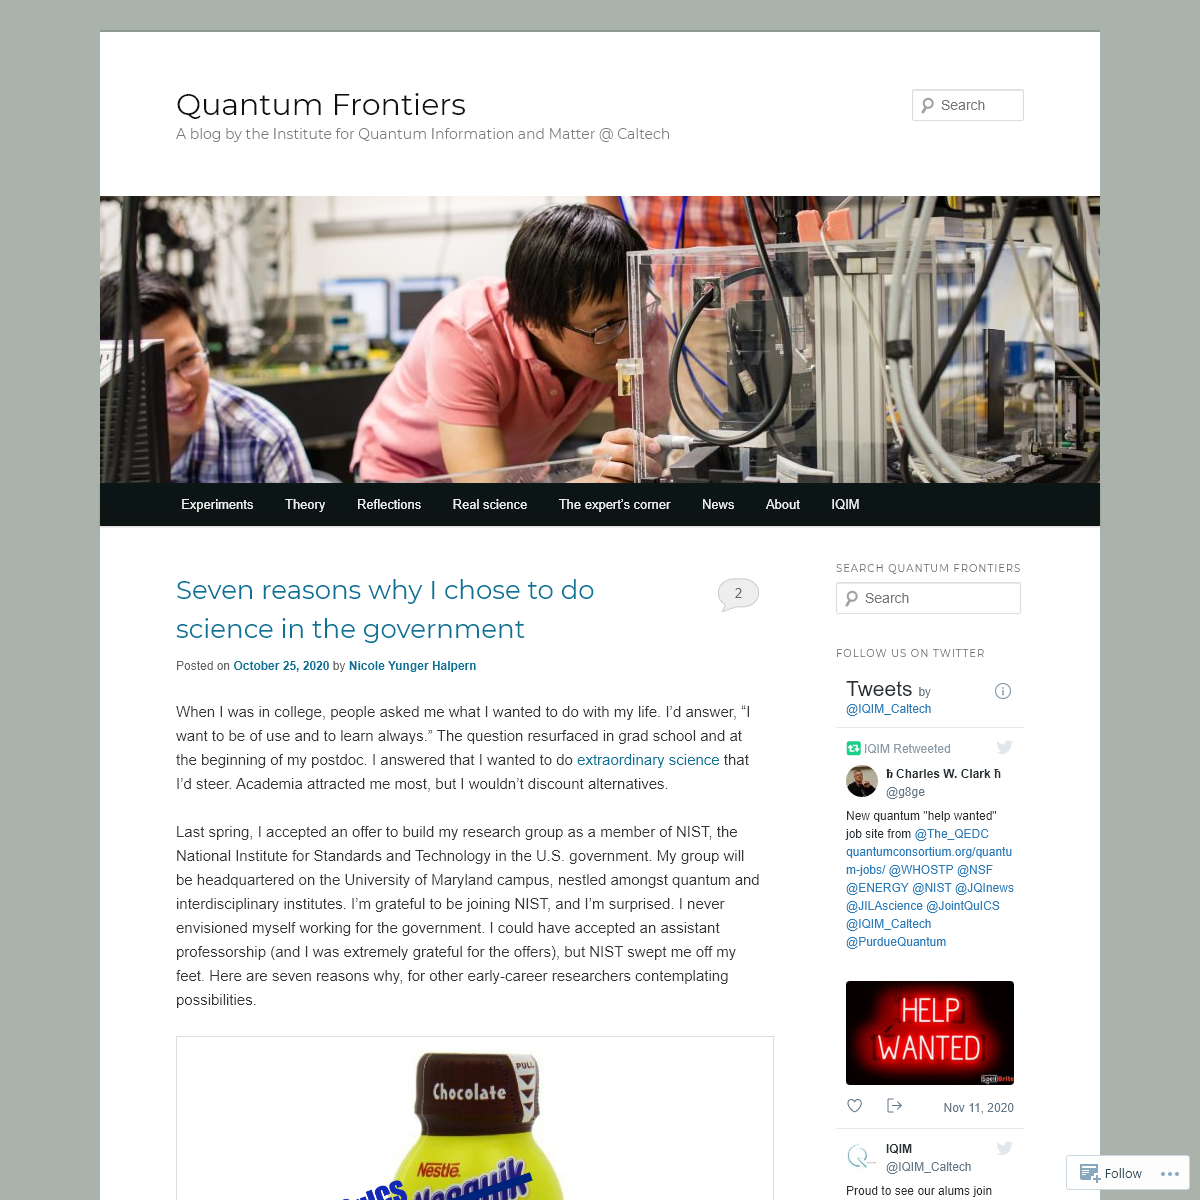 A complete backup of quantumfrontiers.com